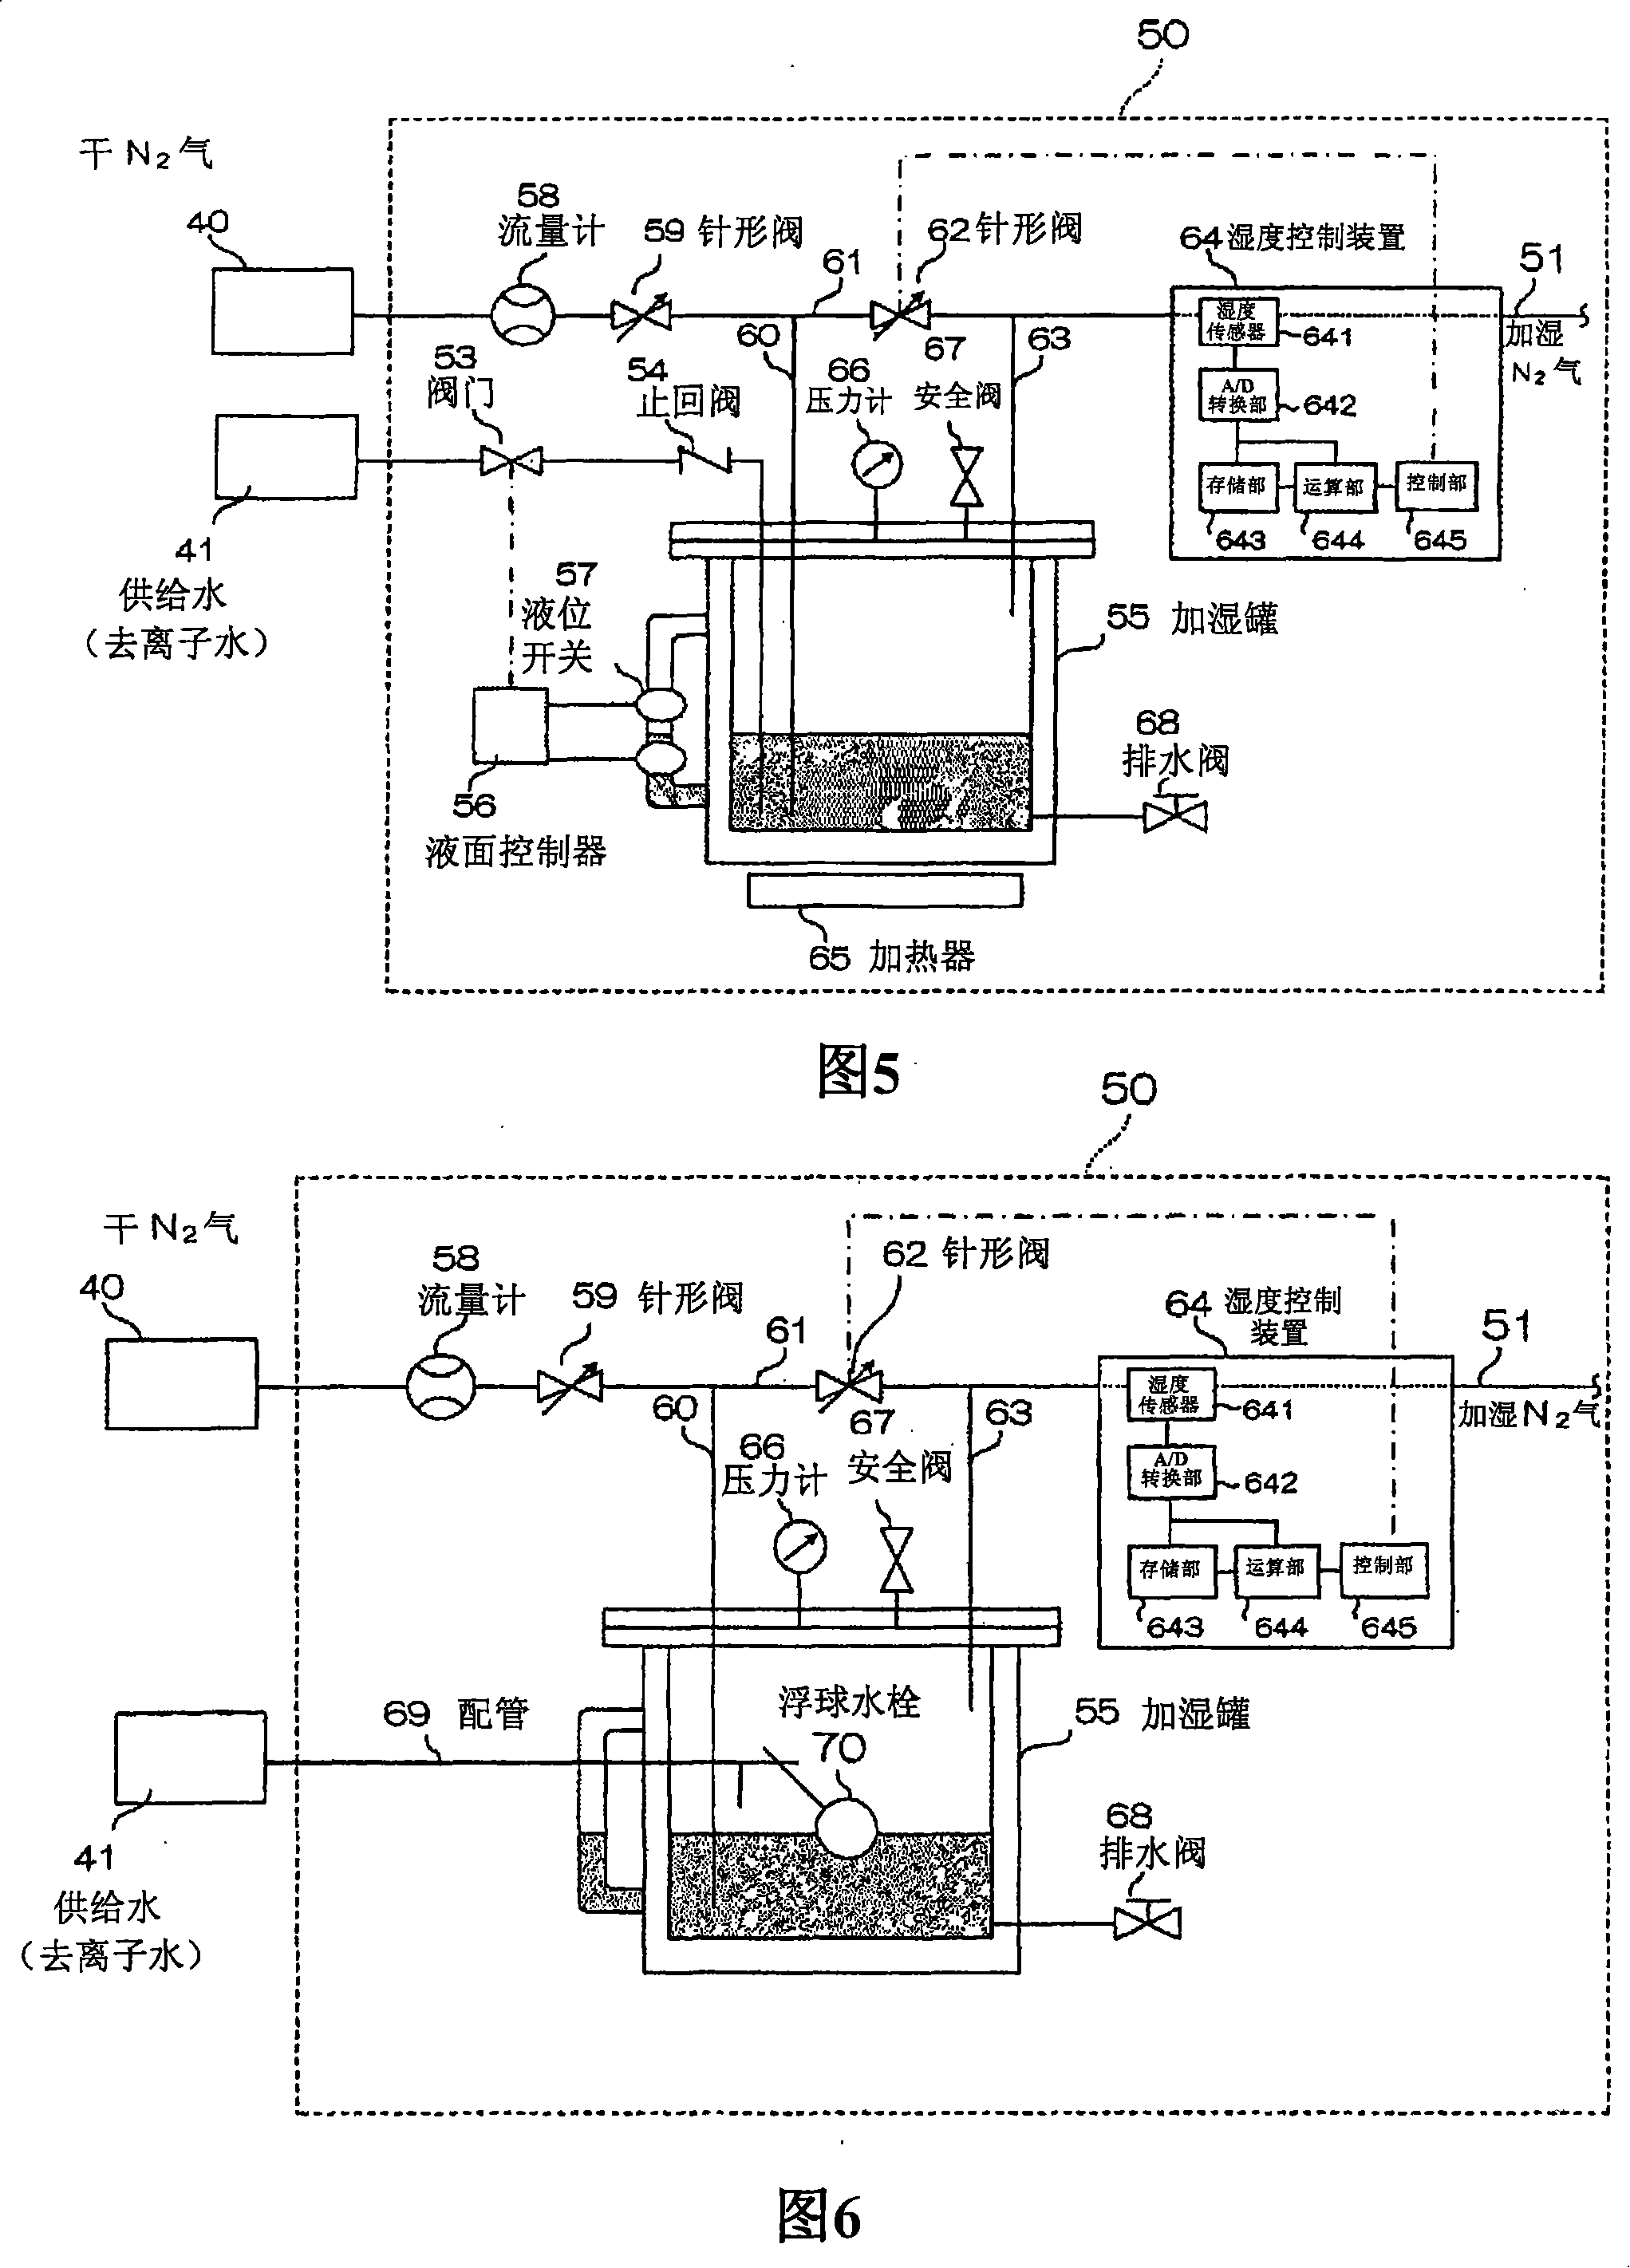 Excimer lamp device